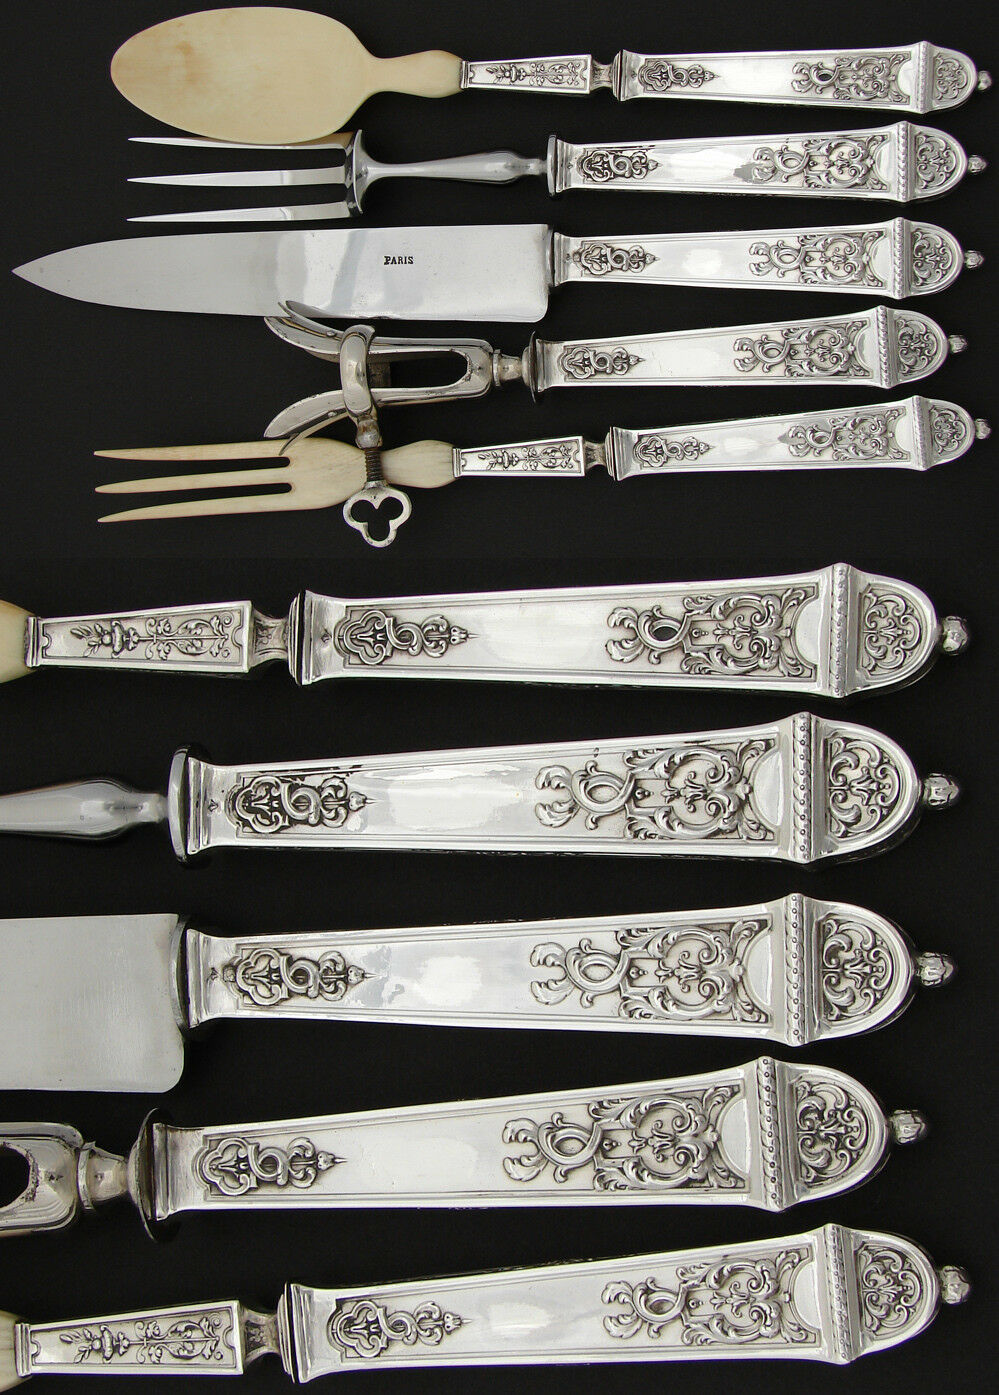 Antique French Empire Style Sterling Silver 5pc Serving Implement Set, Orig. Box